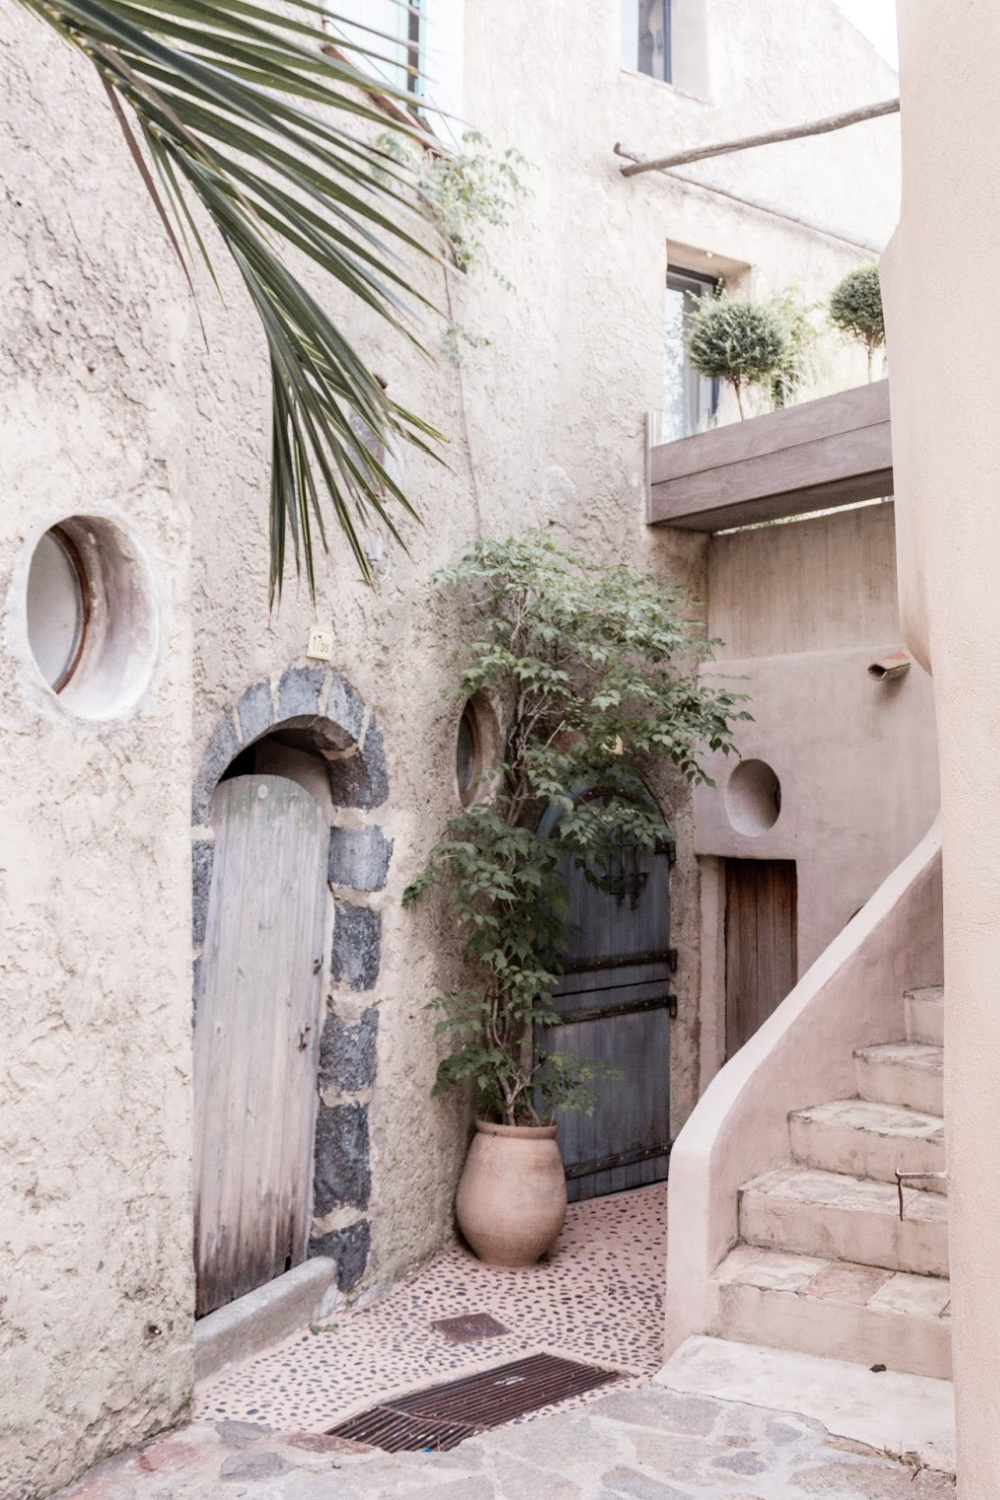 Rustic Old World pale stone buildings in Provence and arched door - The Flying Dutchwoman. 